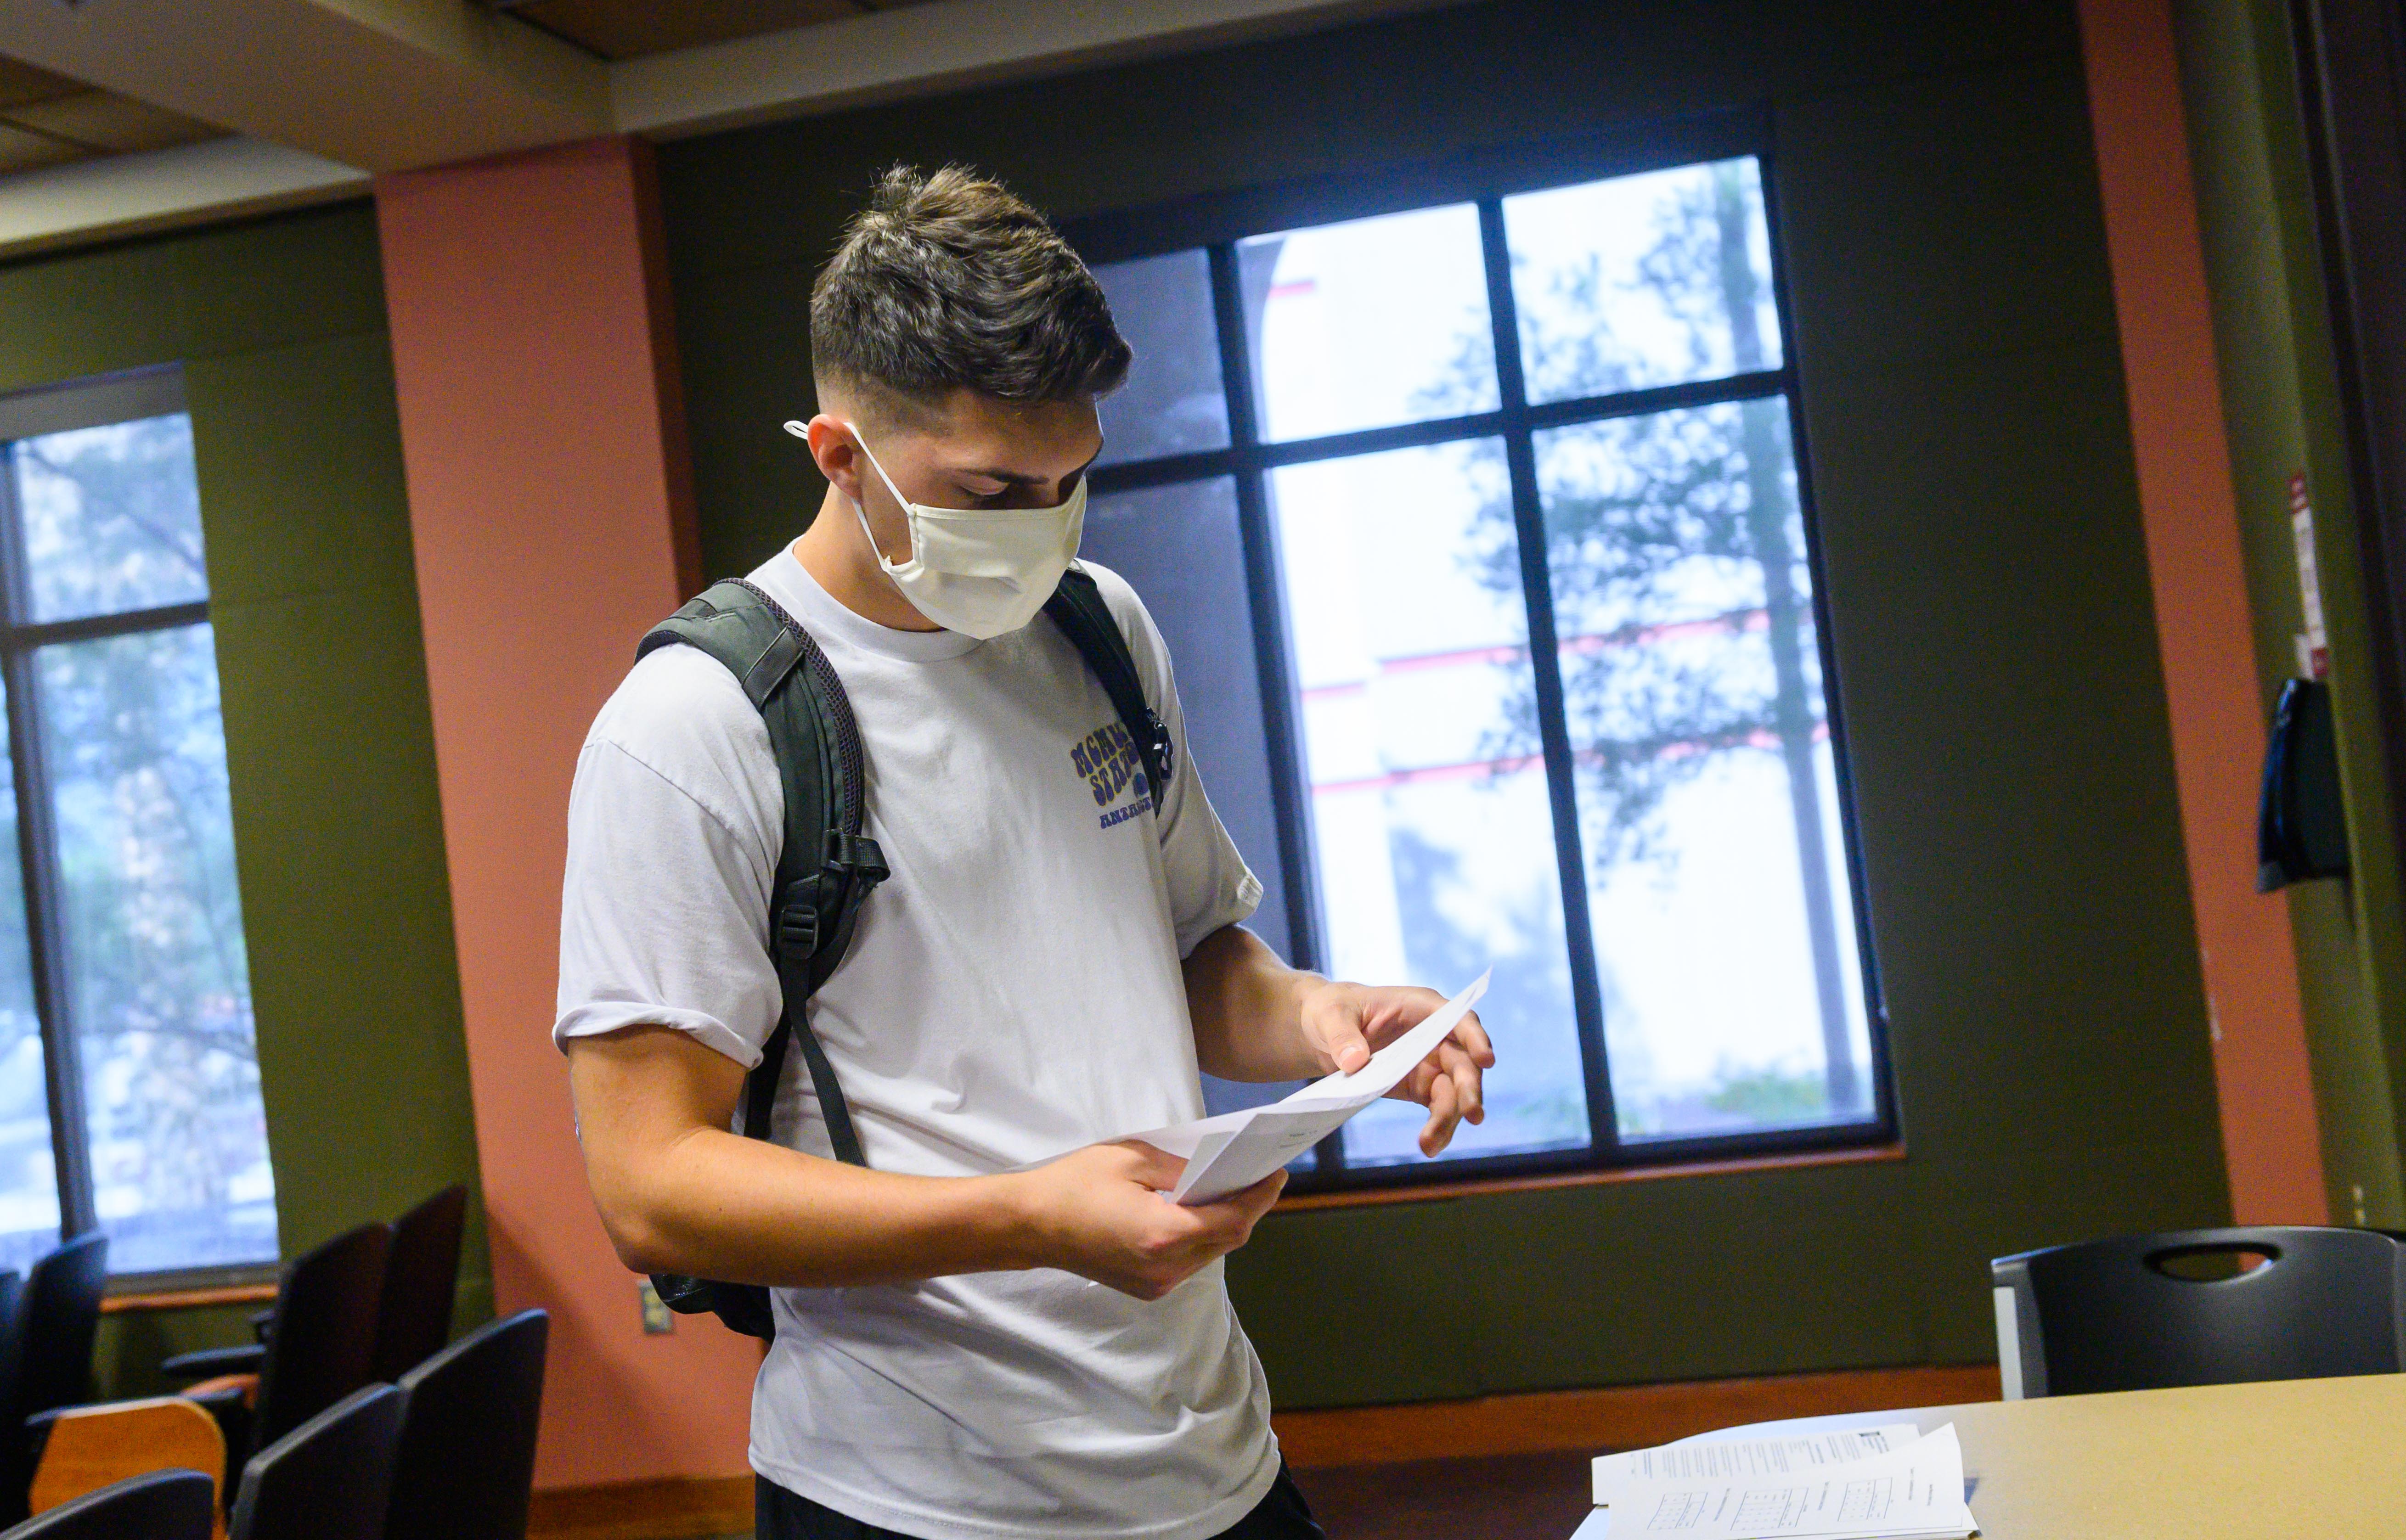 Student in classroom wearing mask